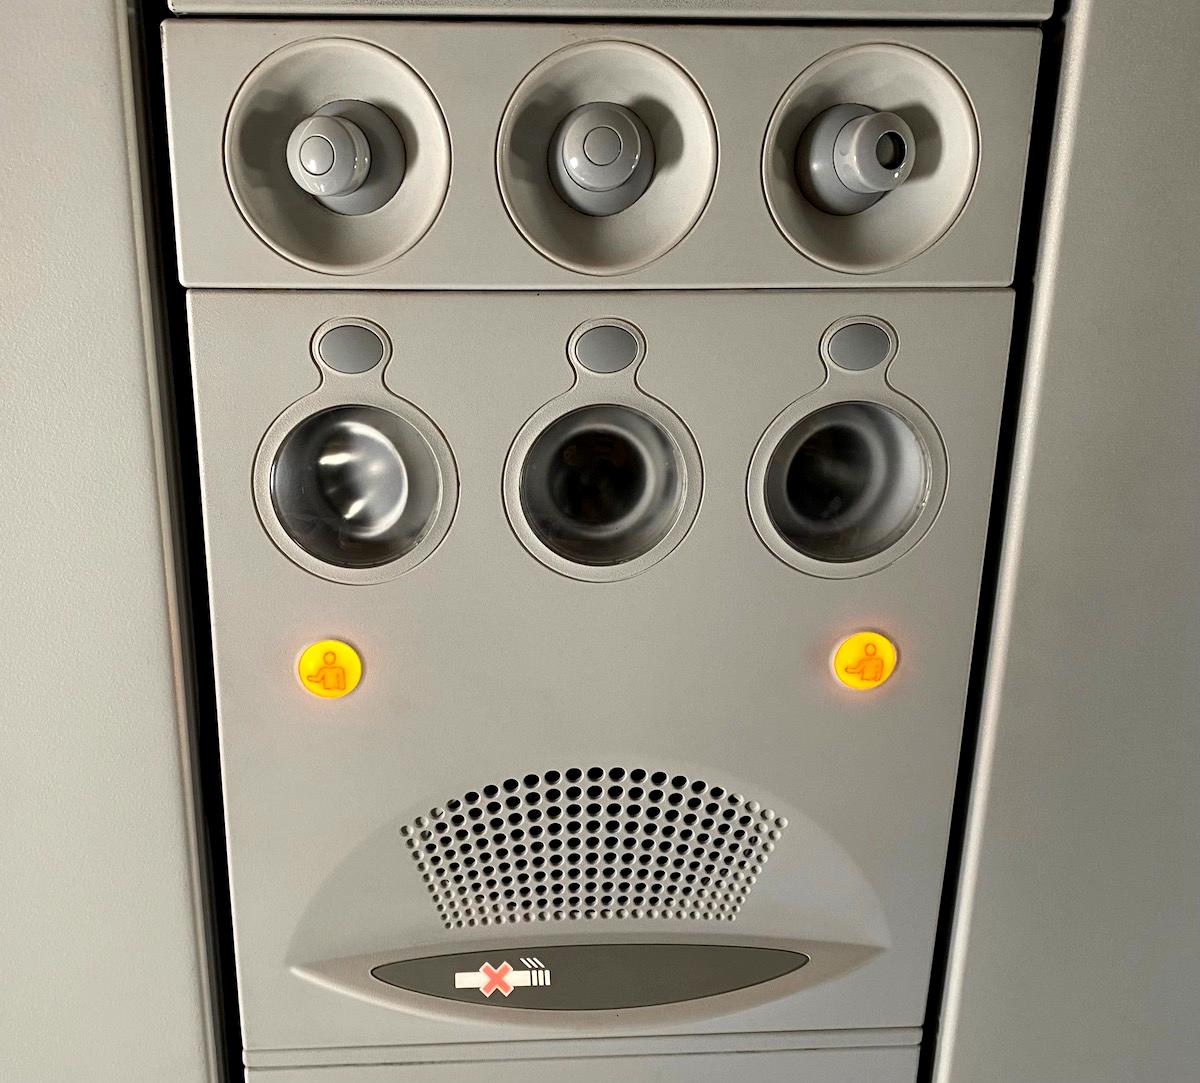 Flight Attendant Call Button: When Should You Use It? - One Mile